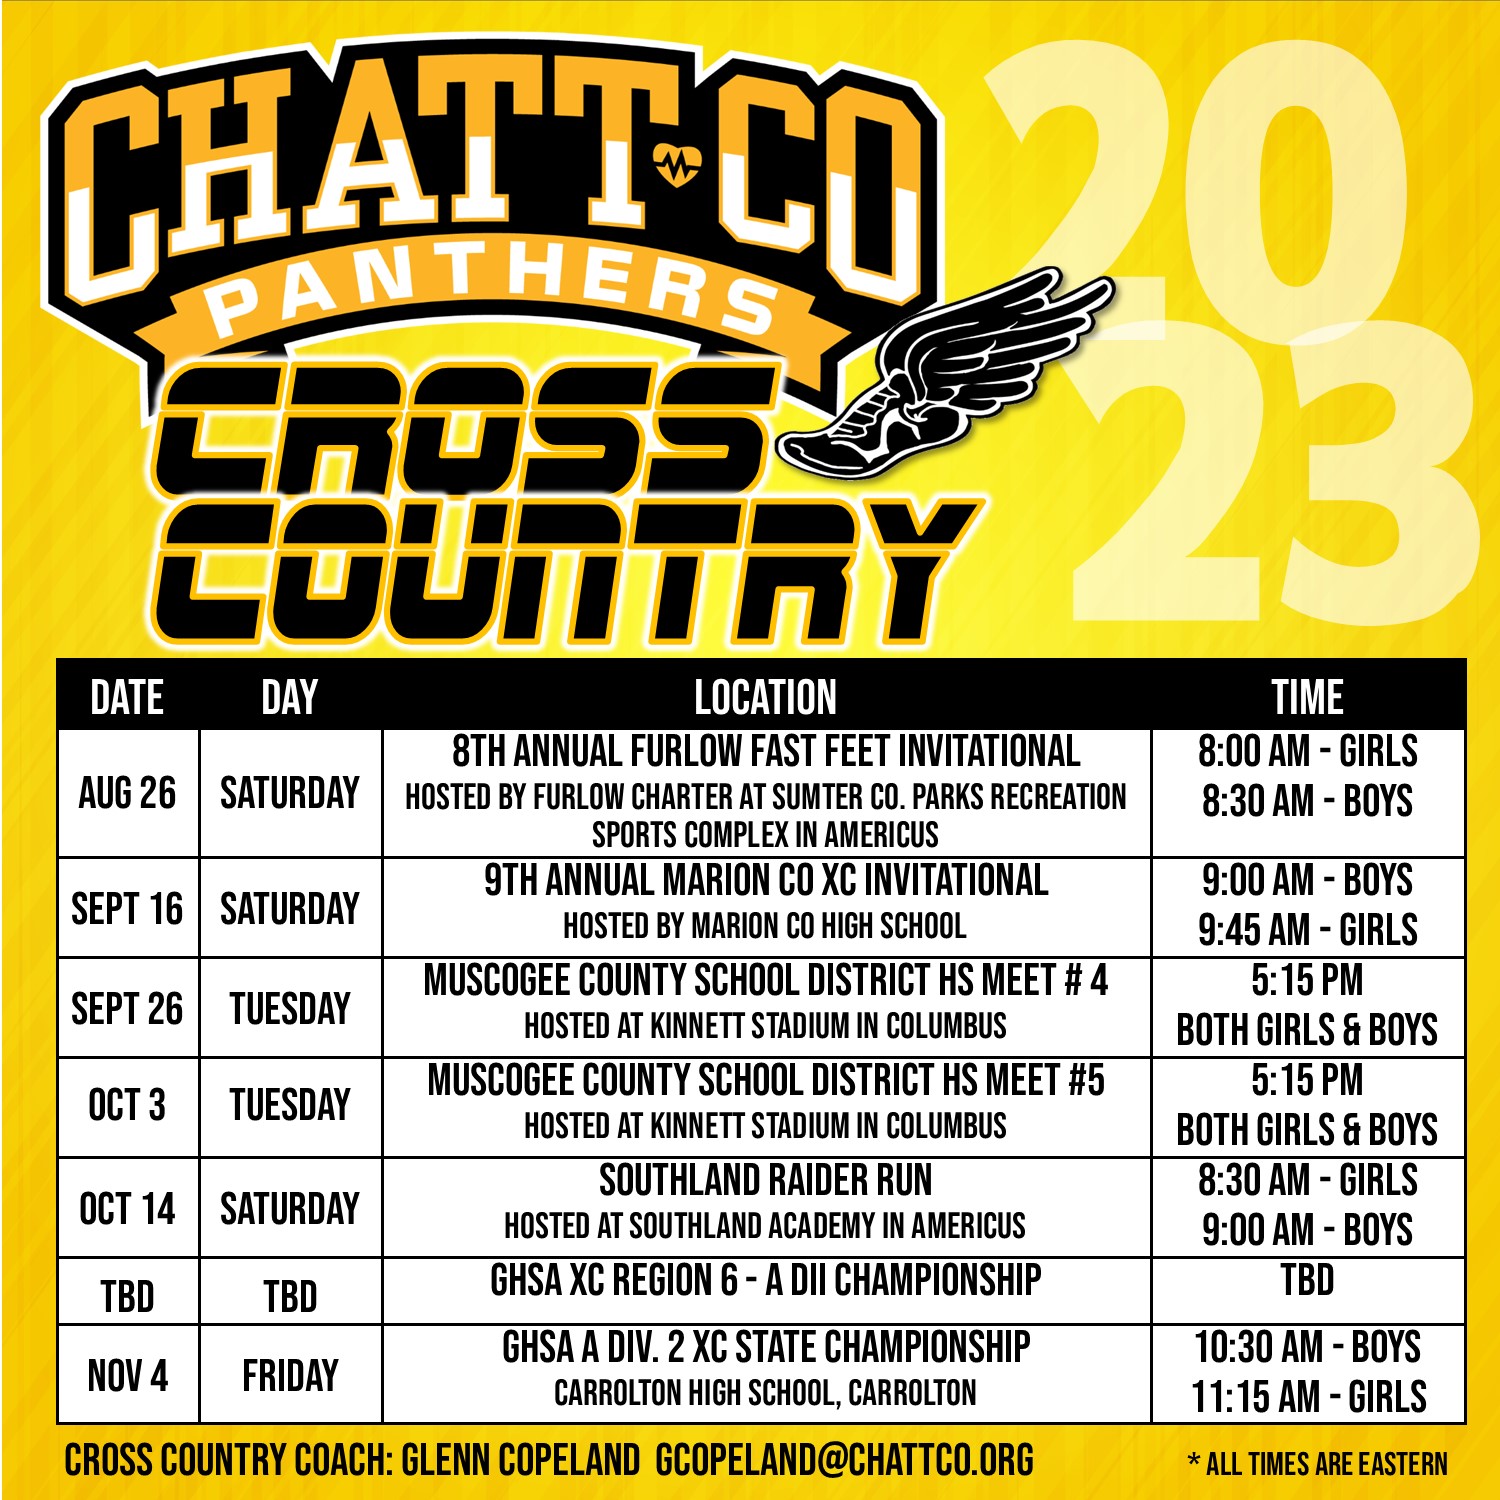 ChattCo Cross Country Schedule 2023  AUG 26	SATURDAY 8TH ANNUAL FURLOW FAST FEET INVITATIONAL HOSTED BY FURLOW CHARTER AT SUMTER CO. PARKS RECREATION SPORTS COMPLEX IN AMERICUS	8:00 AM - GIRLS   8:30 AM - BOYS  SEPT 16	 SATURDAY   9TH ANNUAL MARION CO XC INVITATIONAL  HOSTED BY MARION CO HIGH SCHOOL  9:00 AM - BOYS  9:45 AM - GIRLS  SEPT 26	TUESDAY MUSCOGEE COUNTY SCHOOL DISTRICT HS MEET # 4 HOSTED AT KINNETT STADIUM IN COLUMBUS  5:15 PM  BOTH GIRLS & BOYS  OCT 3  TUESDAY	MUSCOGEE COUNTY SCHOOL DISTRICT HS MEET #5 HOSTED AT KINNETT STADIUM IN COLUMBUS	5:15 PM  BOTH GIRLS & BOYS  OCT 14	SATURDAY   SOUTHLAND RAIDER RUN   HOSTED AT SOUTHLAND ACADEMY IN AMERICUS    8:30 AM - GIRLS   9:00 AM - BOYS  TBD  TBD  GHSA XC REGION 6 - A DII CHAMPIONSHIP	TBD     NOV 4	FRIDAY	GHSA A DIV. 2 XC STATE CHAMPIONSHIP   CARROLTON HIGH SCHOOL, CARROLTON  10:30 AM - BOYS  11:15 AM - GIRLS Cross country coach: Glenn Copeland gcopeland@chattco.org   *all times are eastern